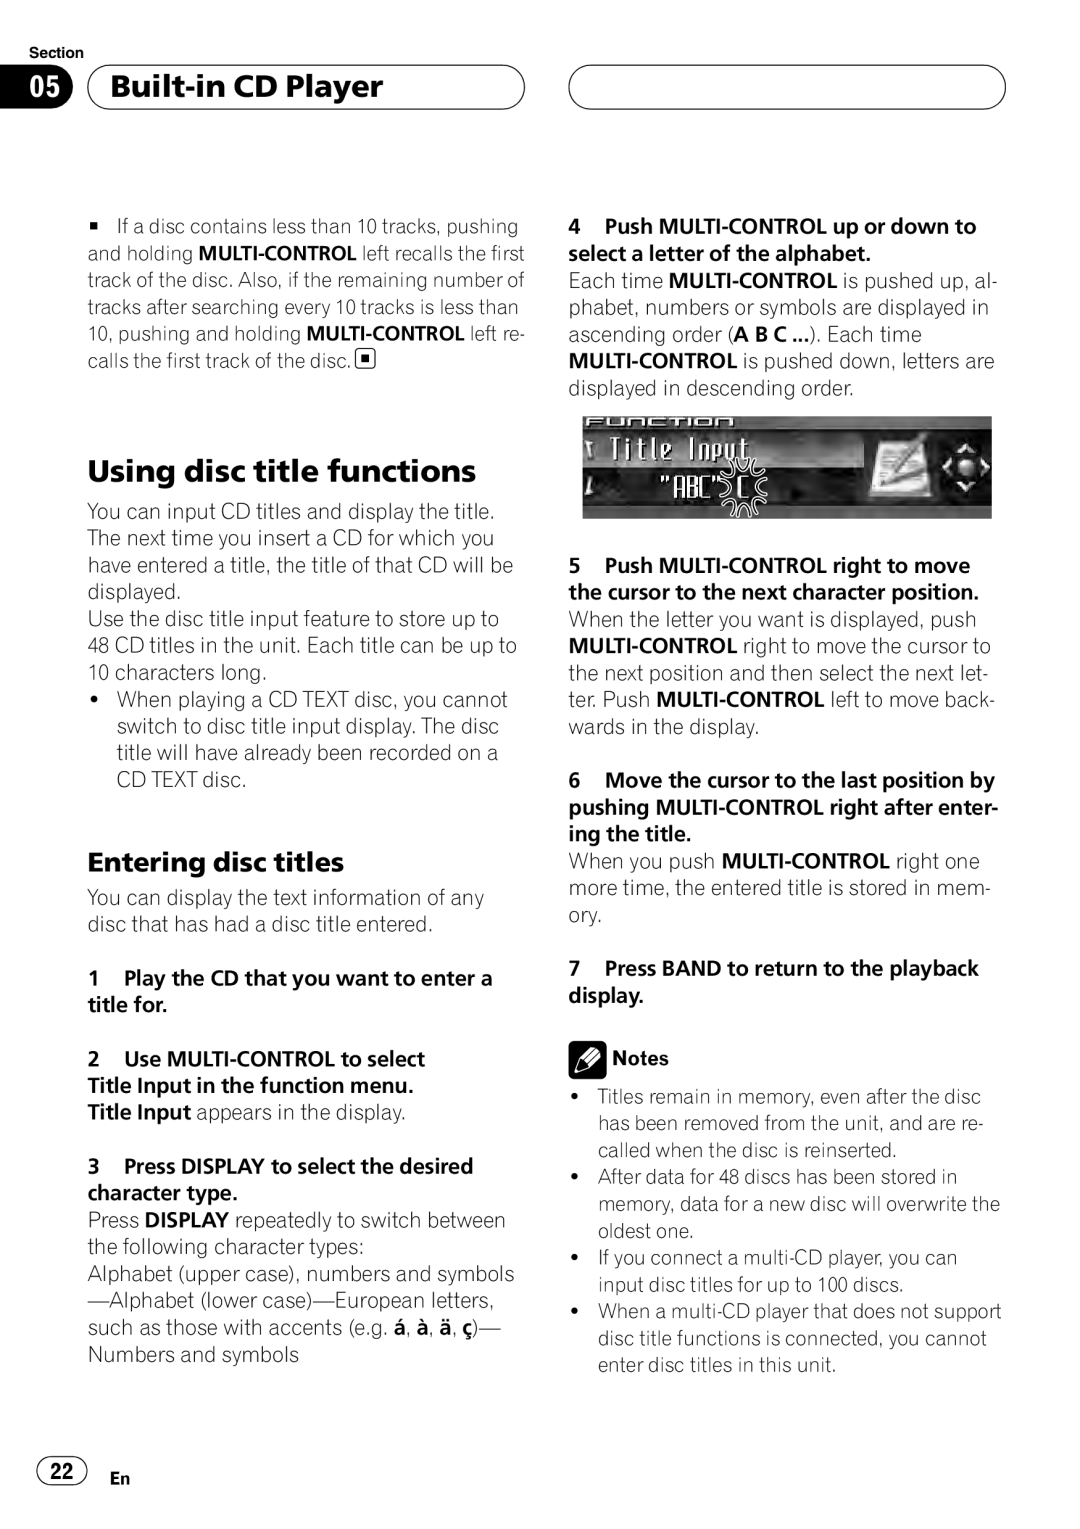 Sirius Satellite Radio DEH-P7800MP operation manual 05Built-inCD Player, Using disc title functions, Entering disc titles 